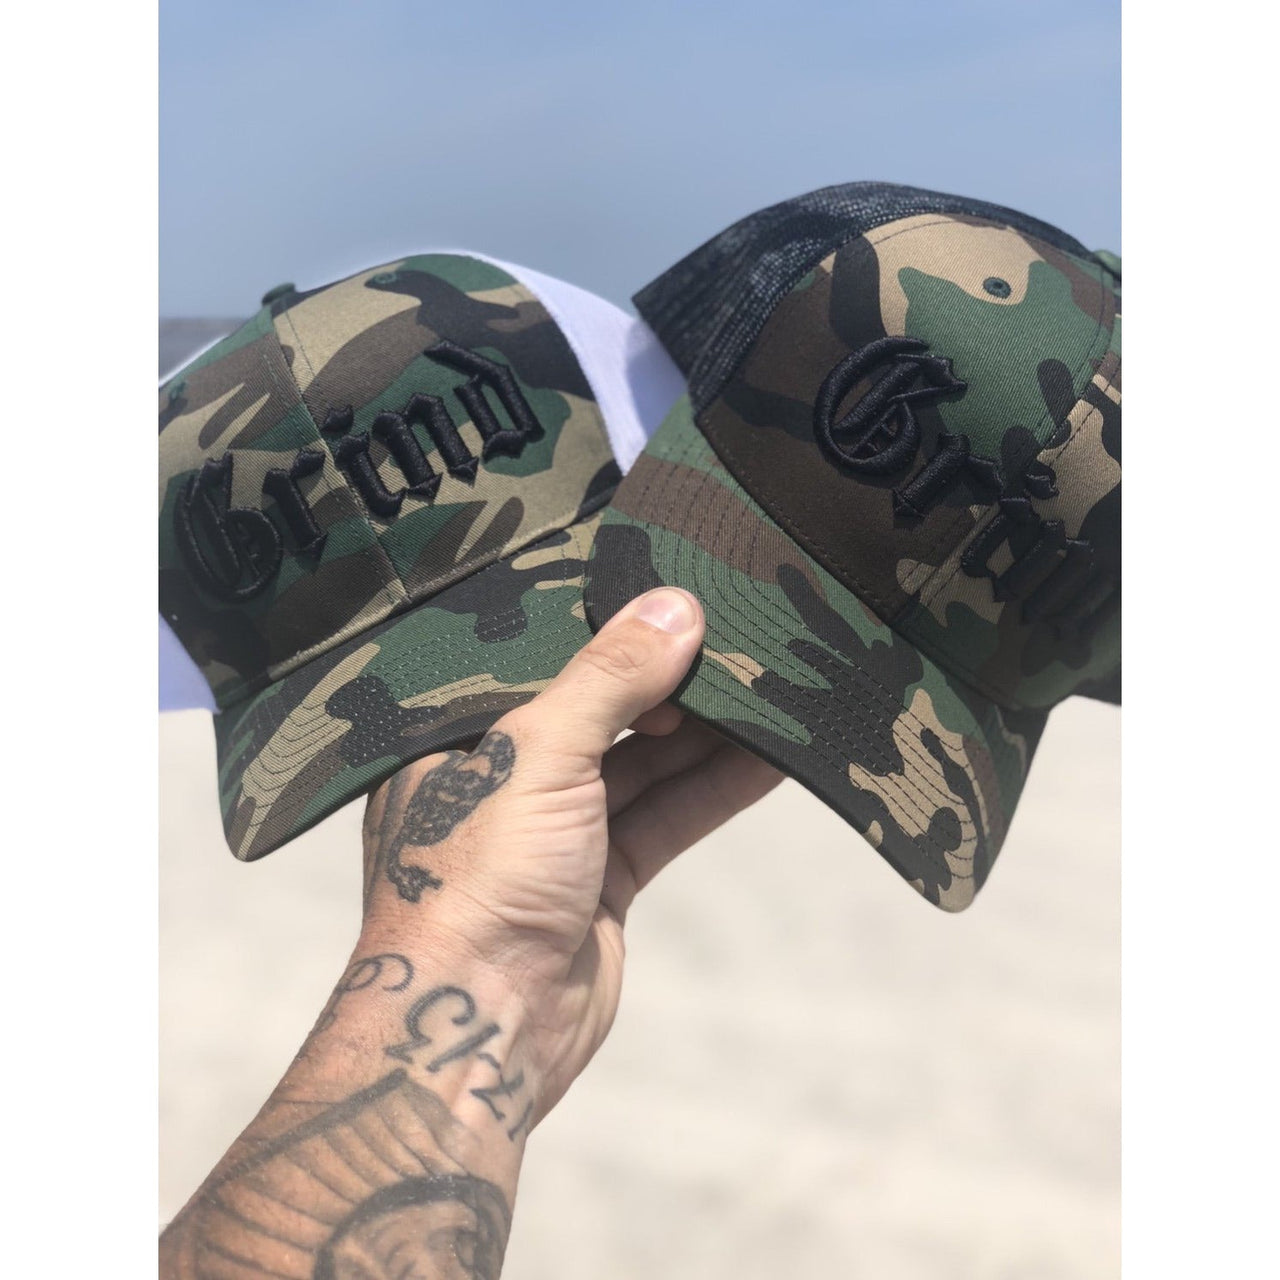 The Grind Athletics Camo Snapback 3D embroidered Trucker Caps